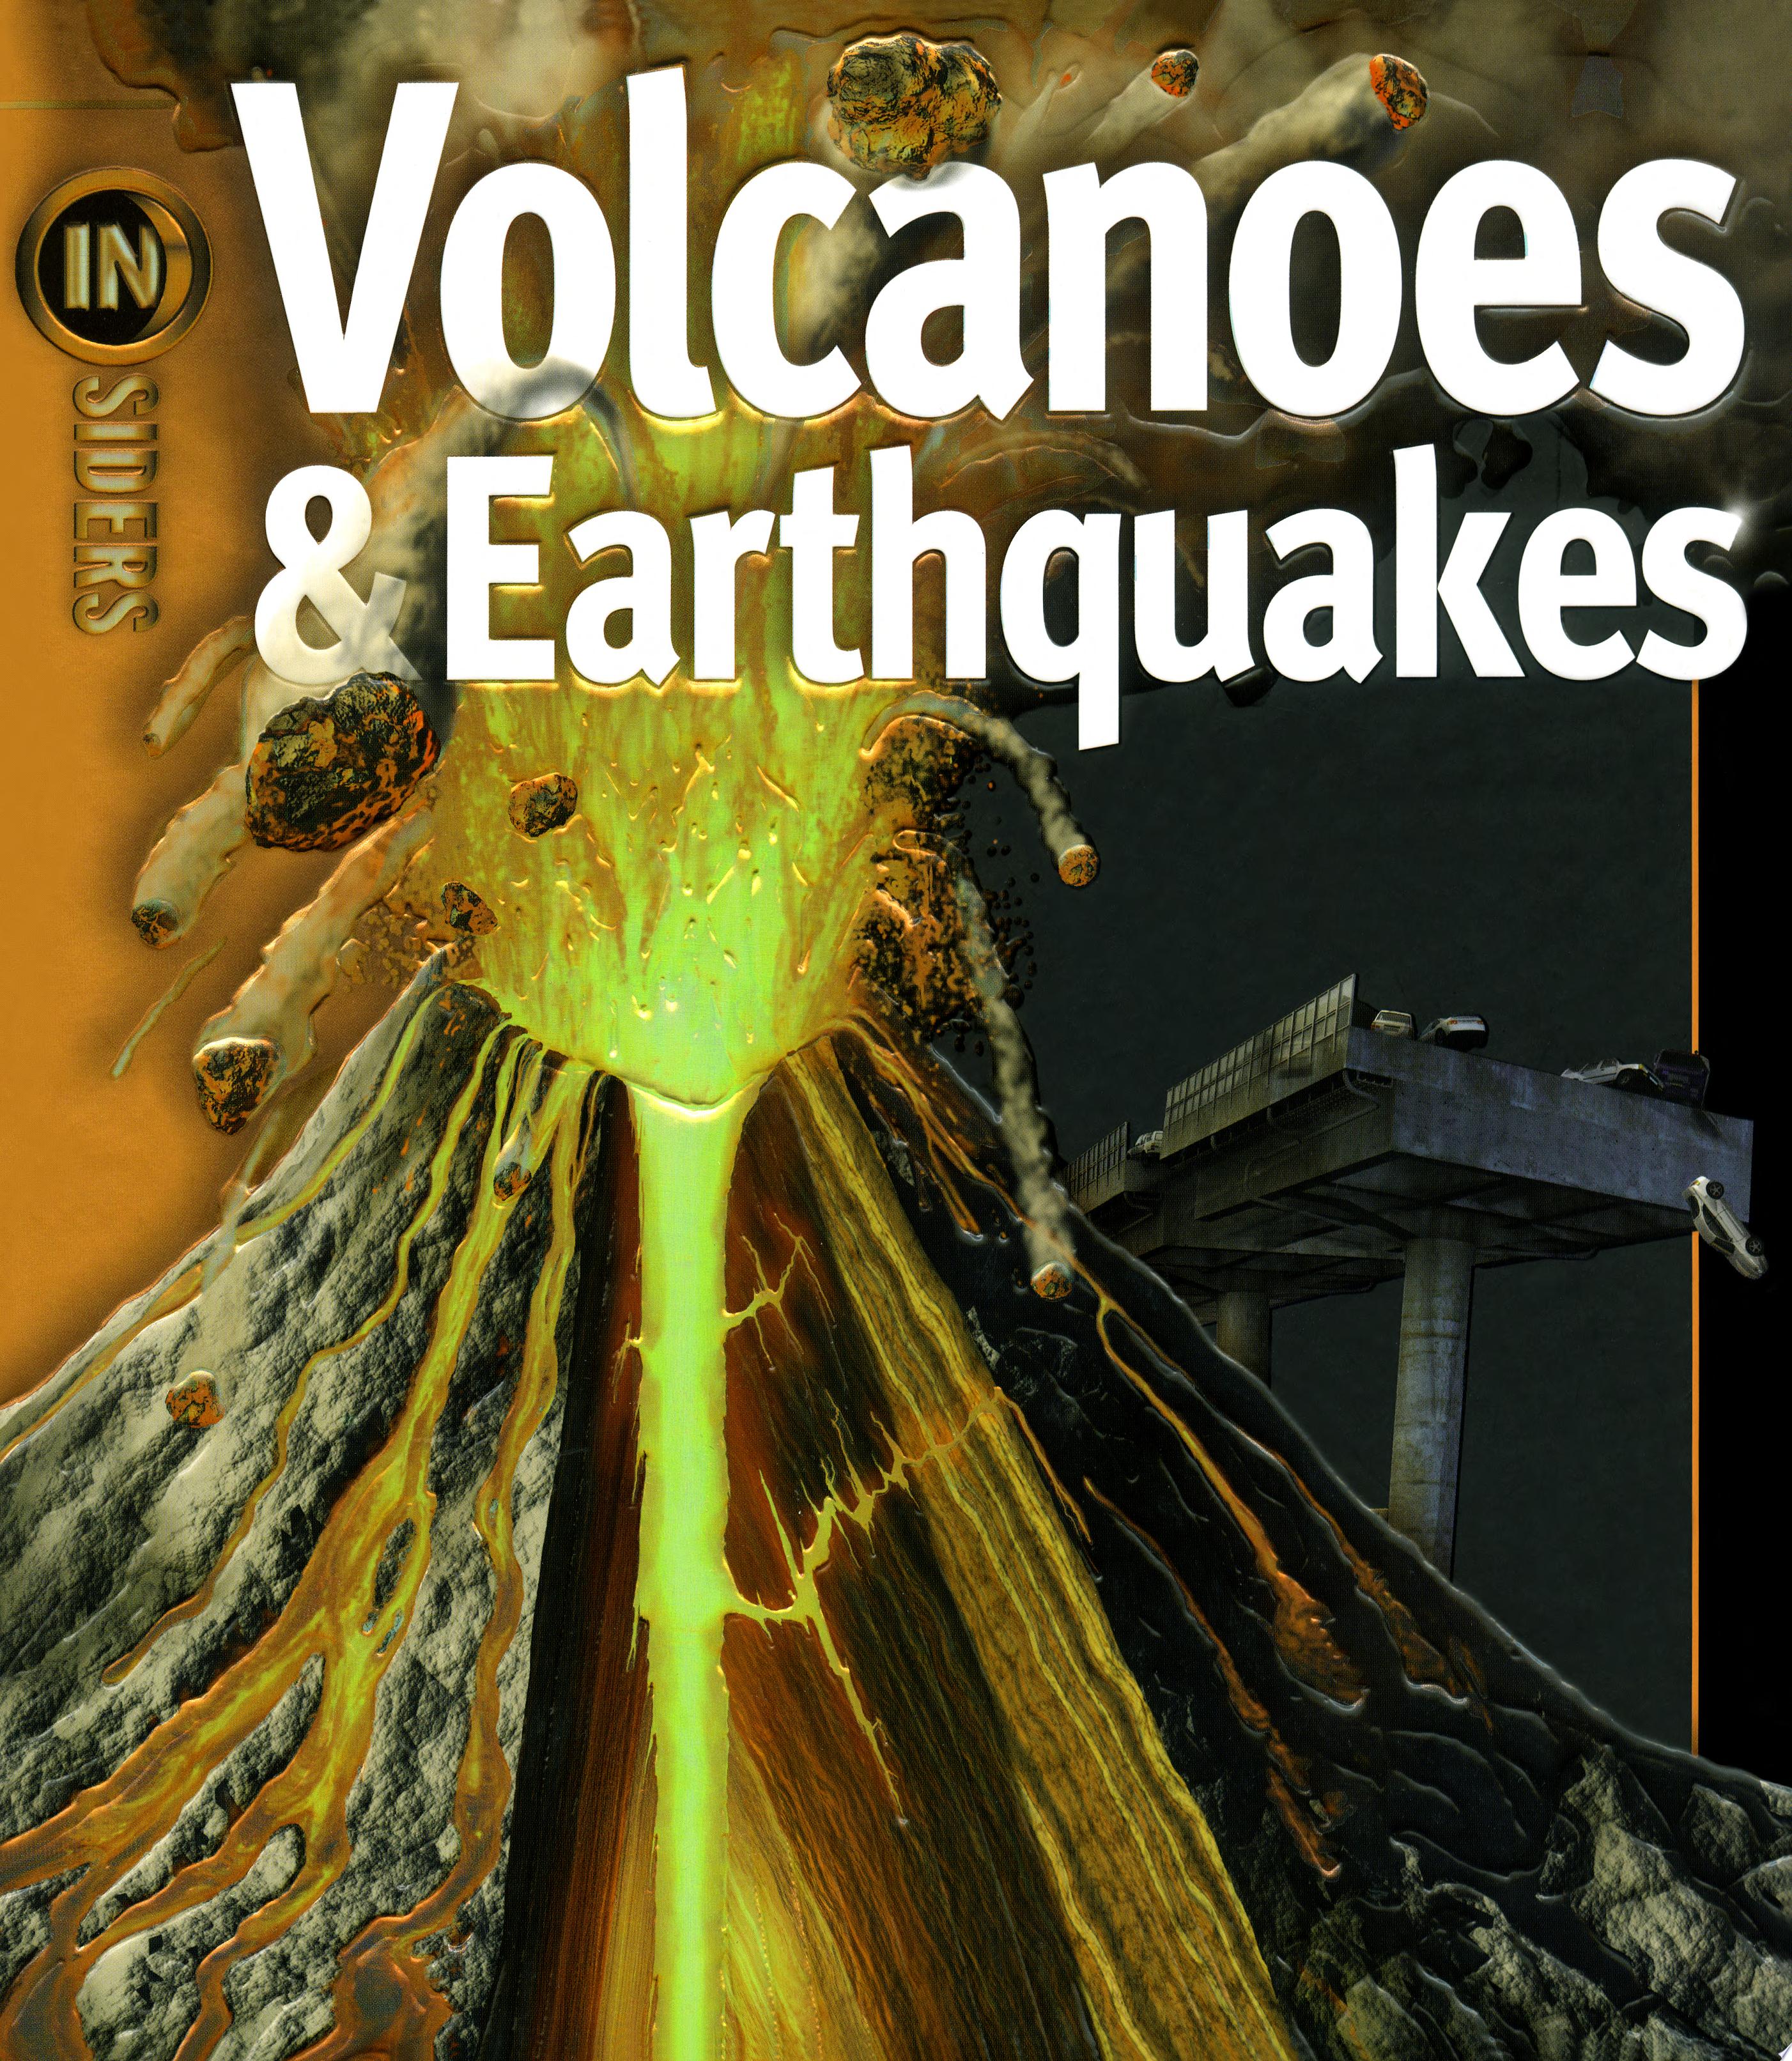 Image for "Volcanoes &amp; Earthquakes"